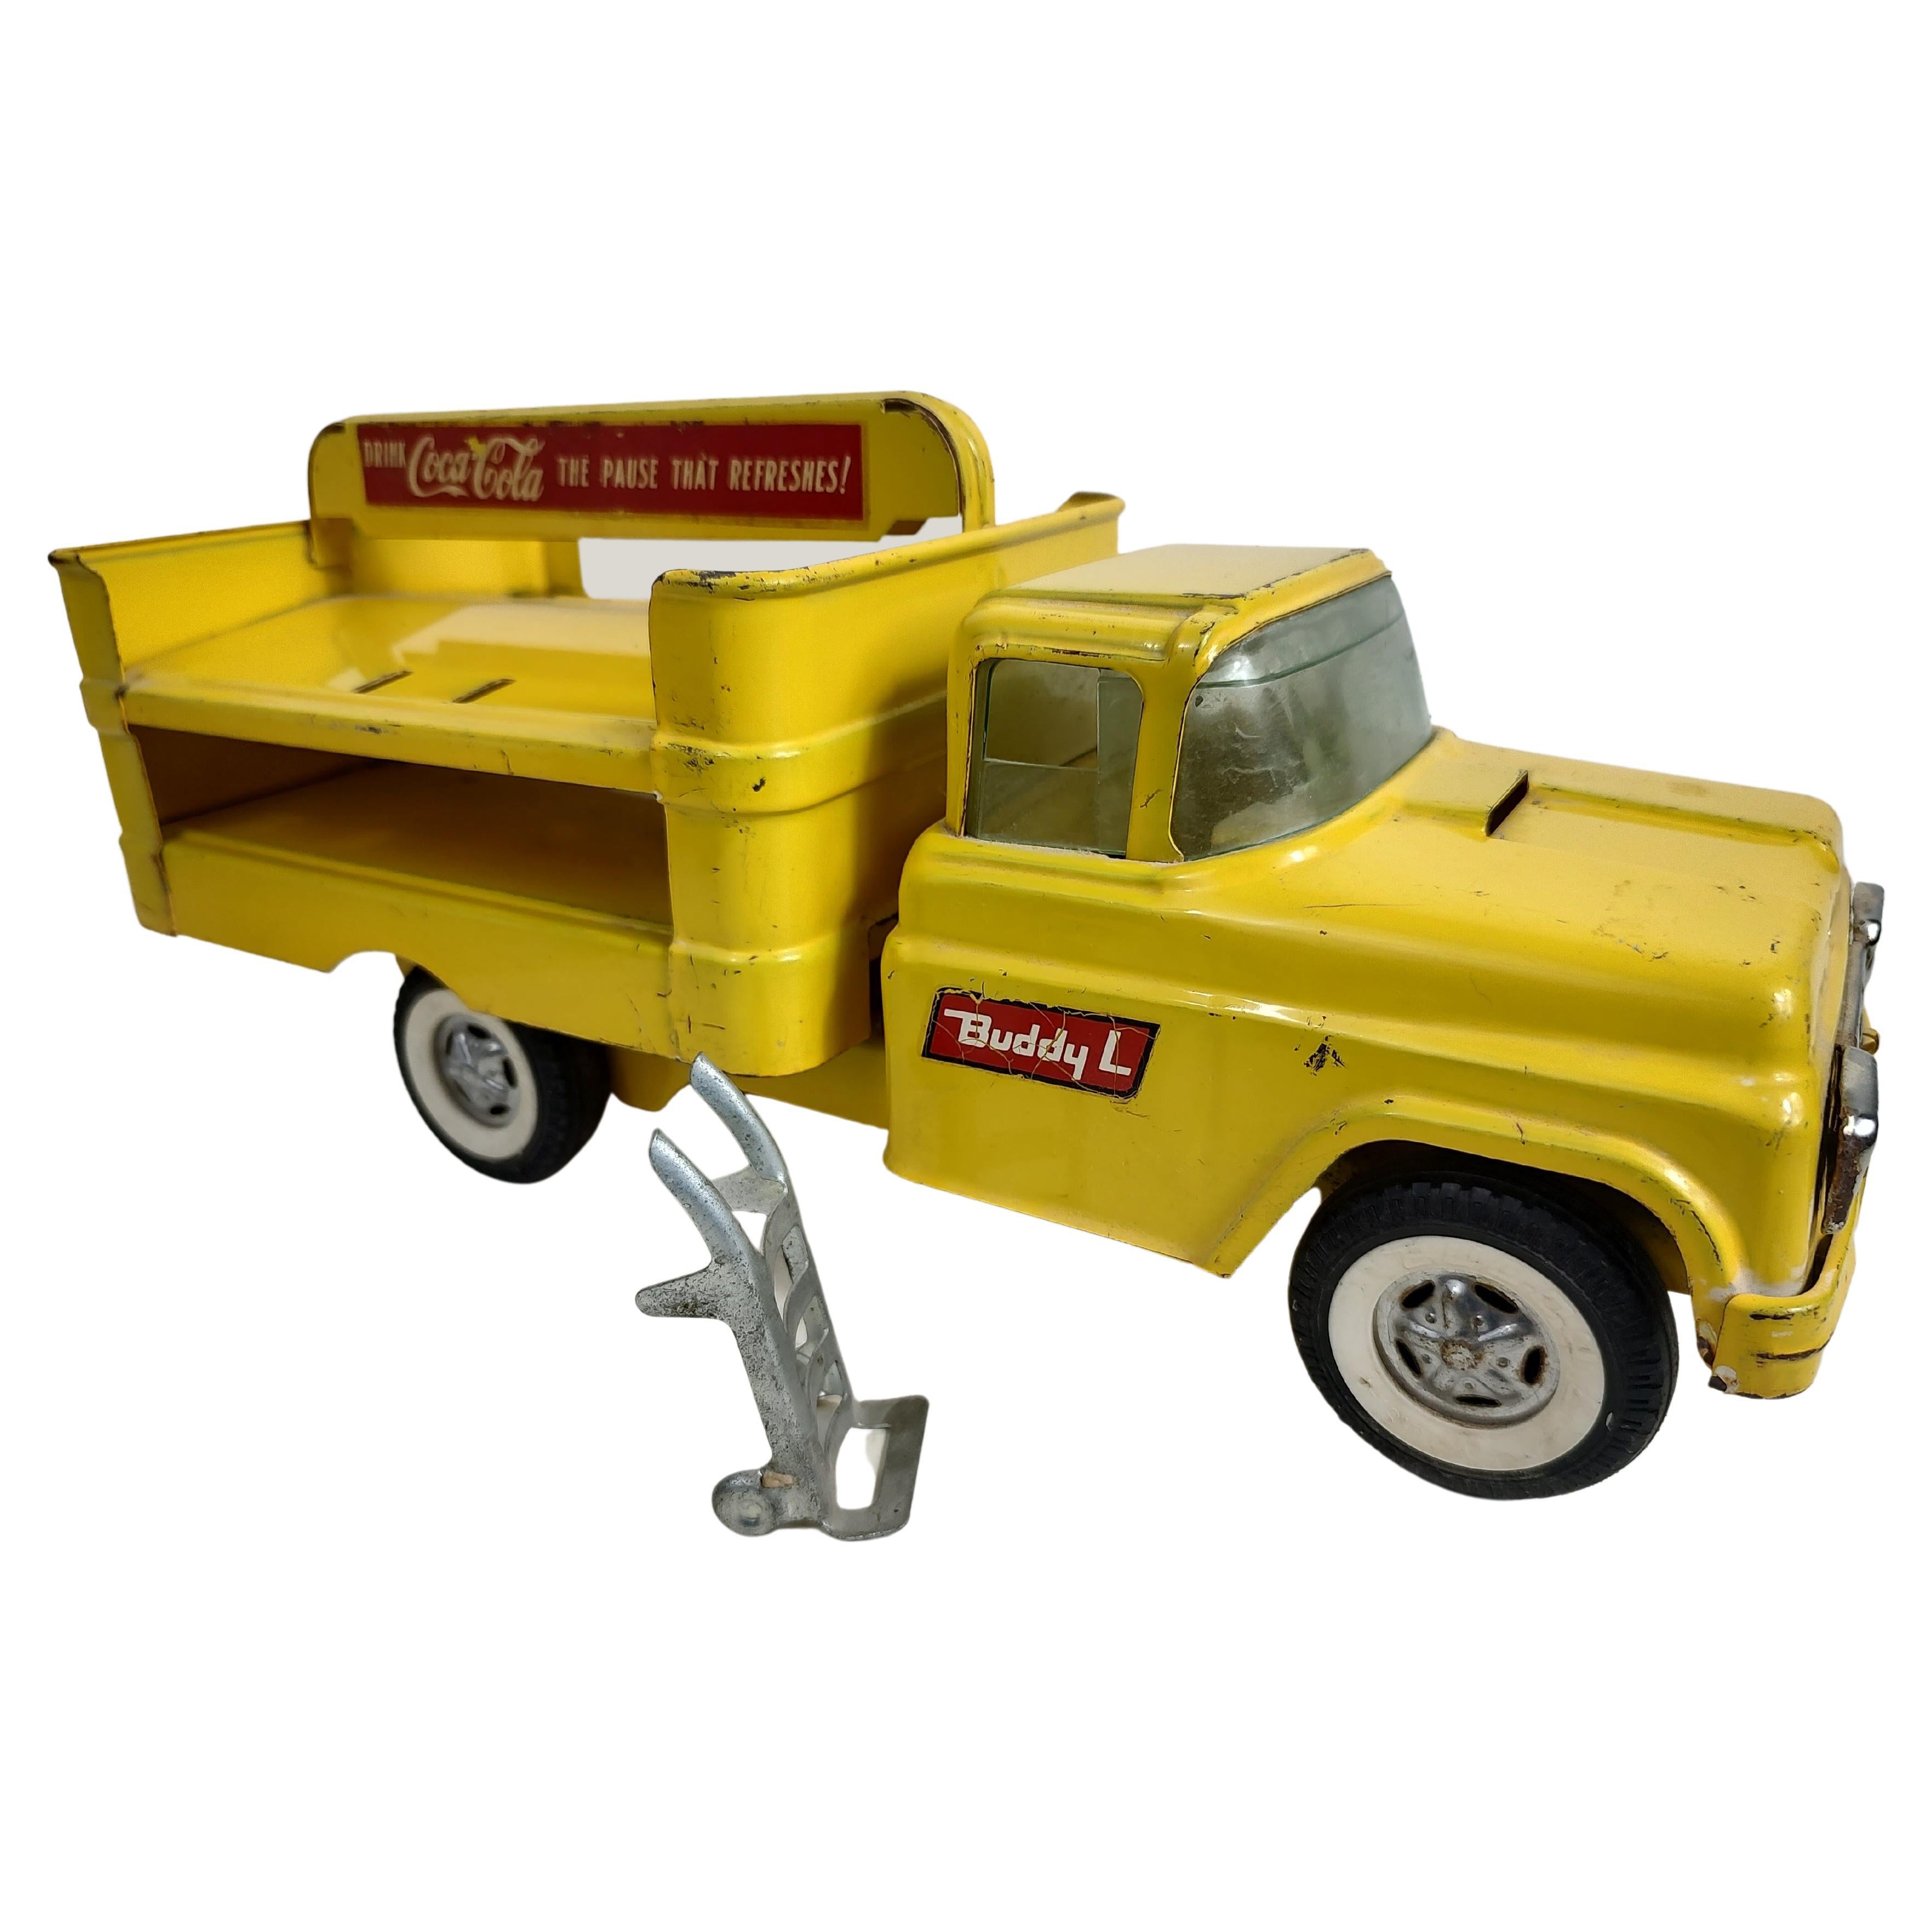 Mid-Century Coca Cola Delivery Truck by Buddy L, C1960